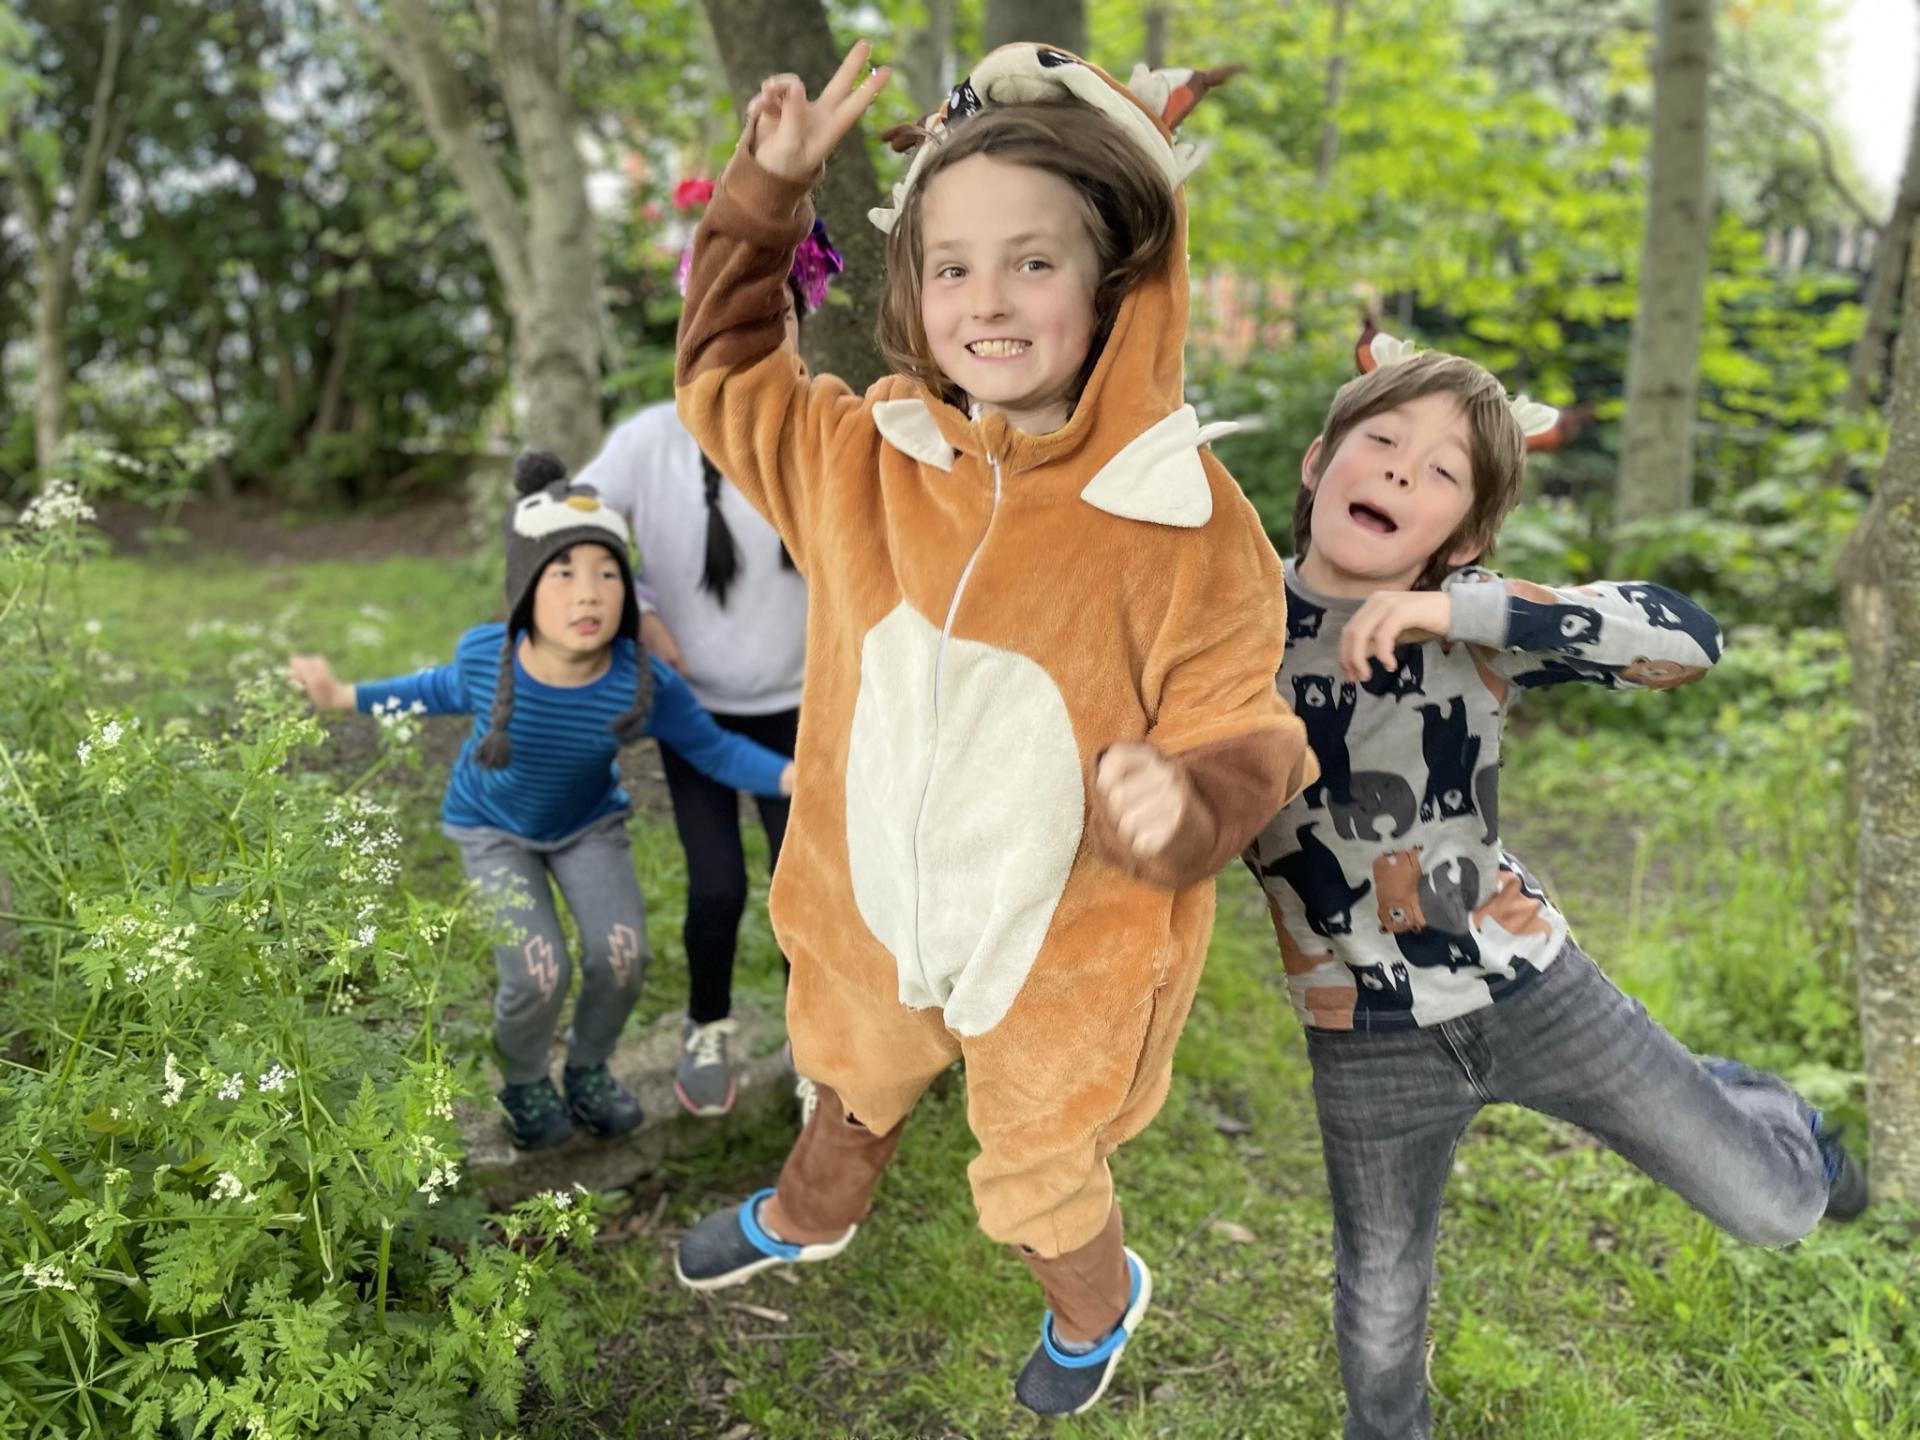 Children celebrating the launch of Wild Neighbourhood, which takes place on Saturday, June 10th from 1pm – 5pm on DCU All Hallows campus